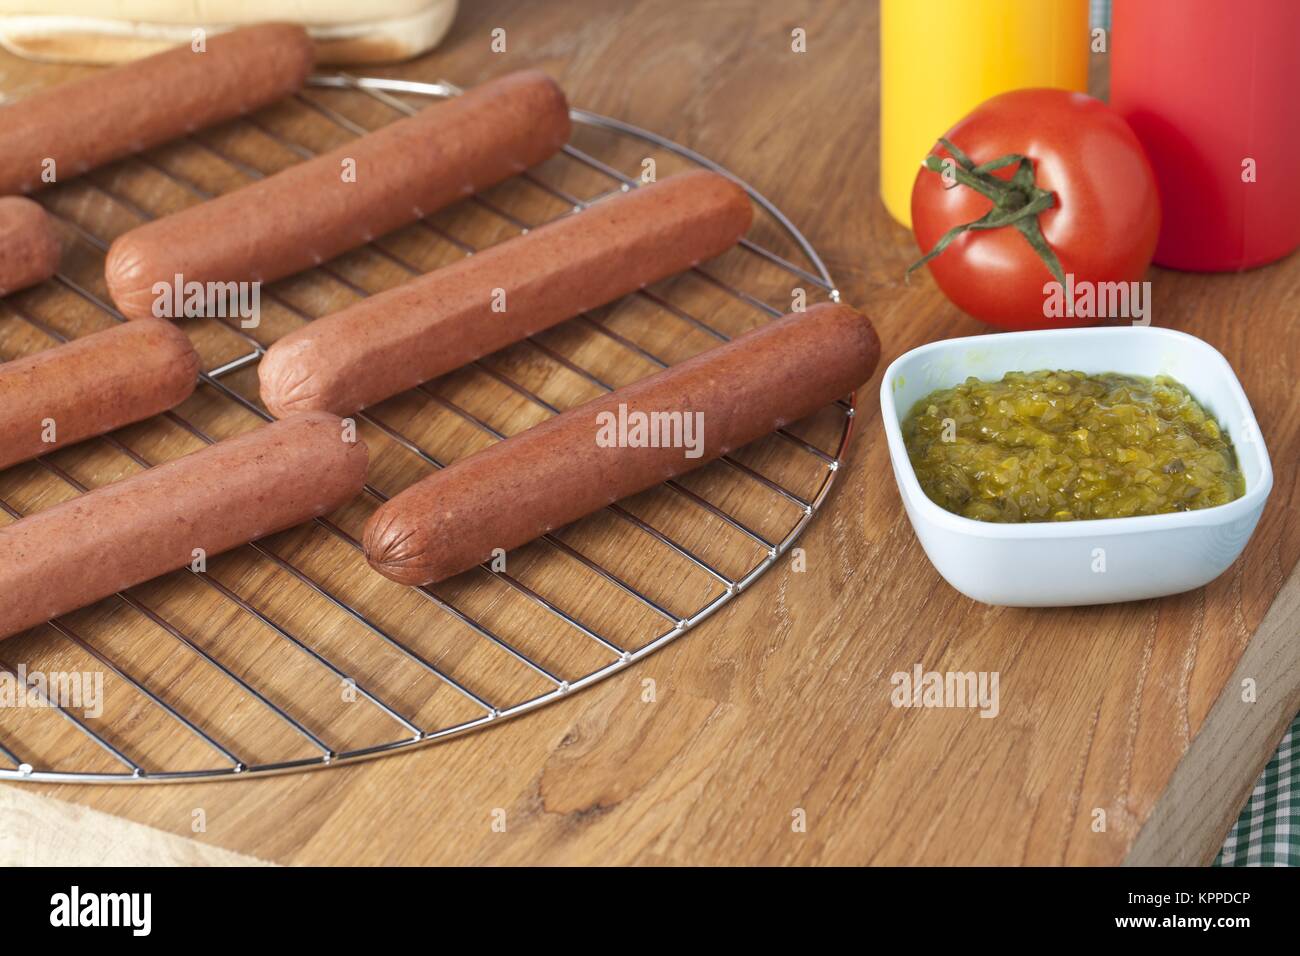 hot dogs pickles and tomato Stock Photo